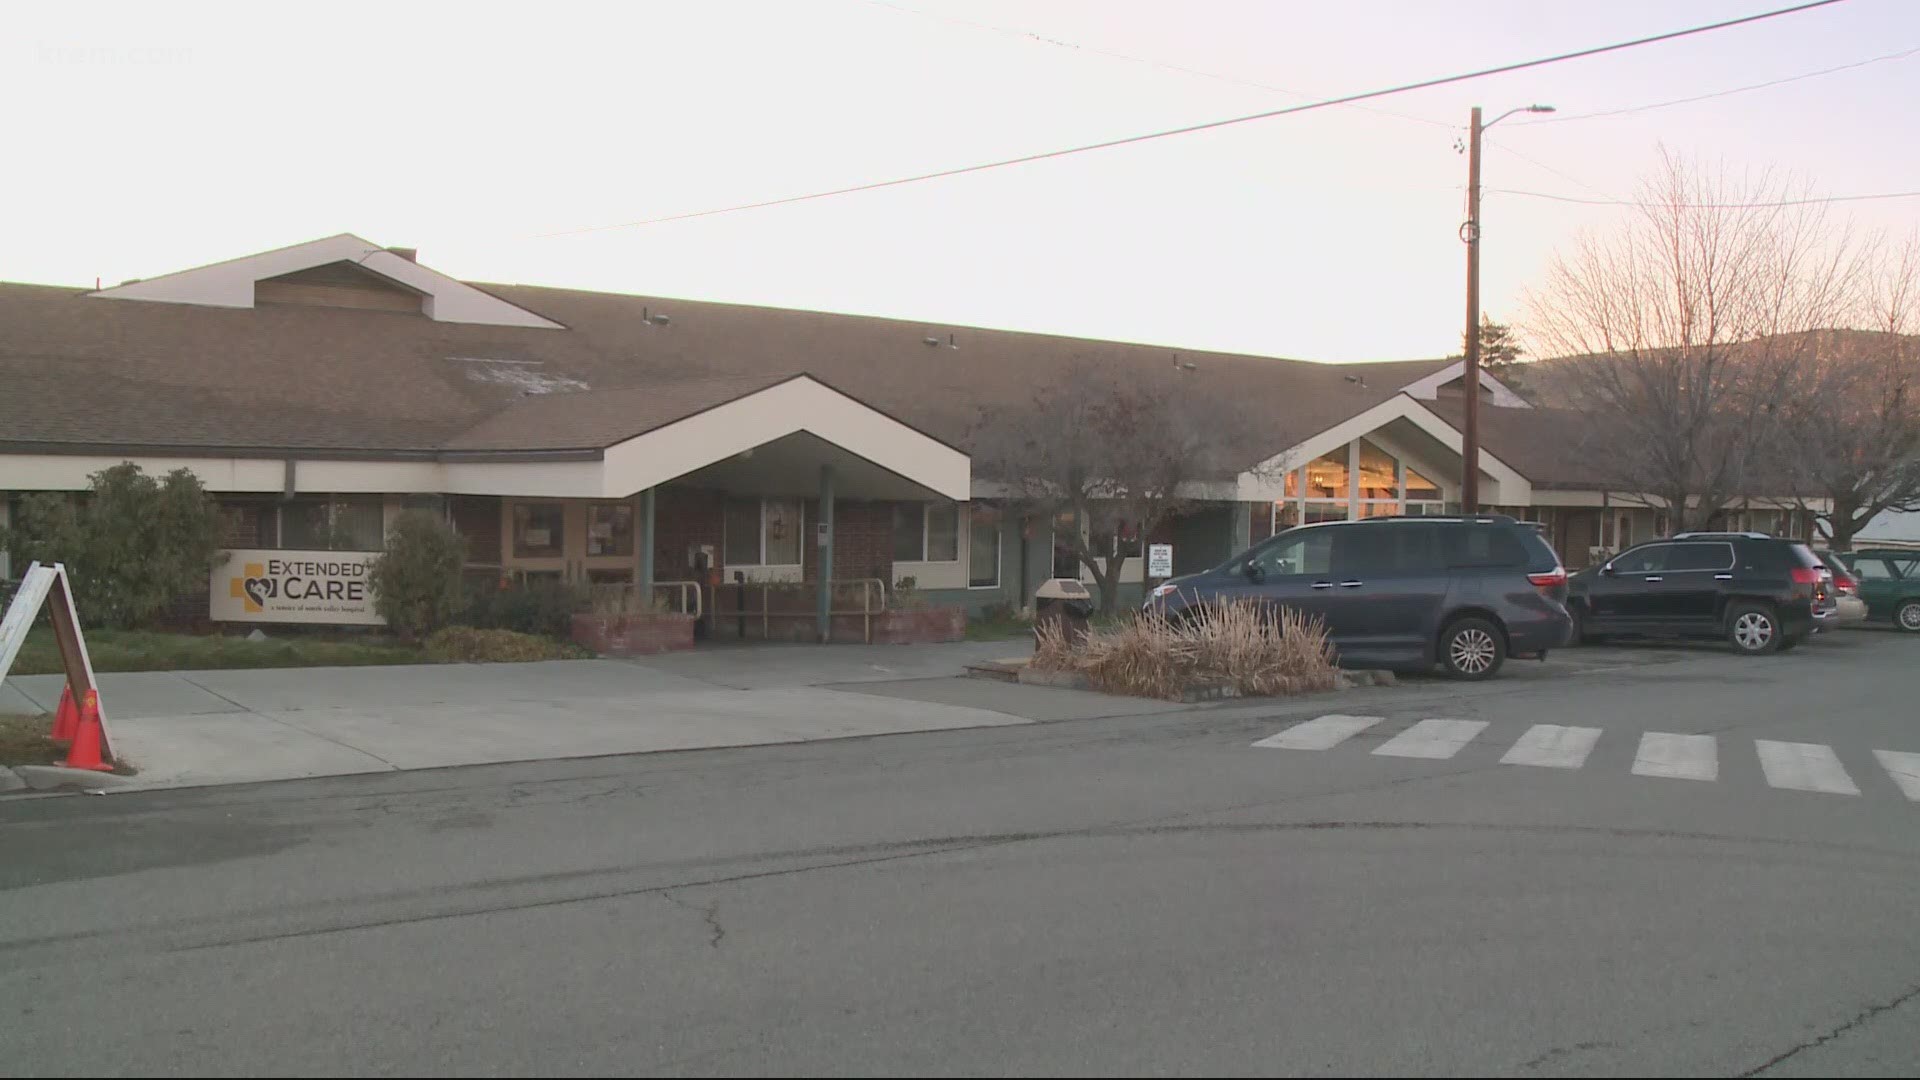 The outbreak at North Valley Extended Care has resulted in 32 positive tests and 12 deaths among residents, according to Okanogan County Public Health.